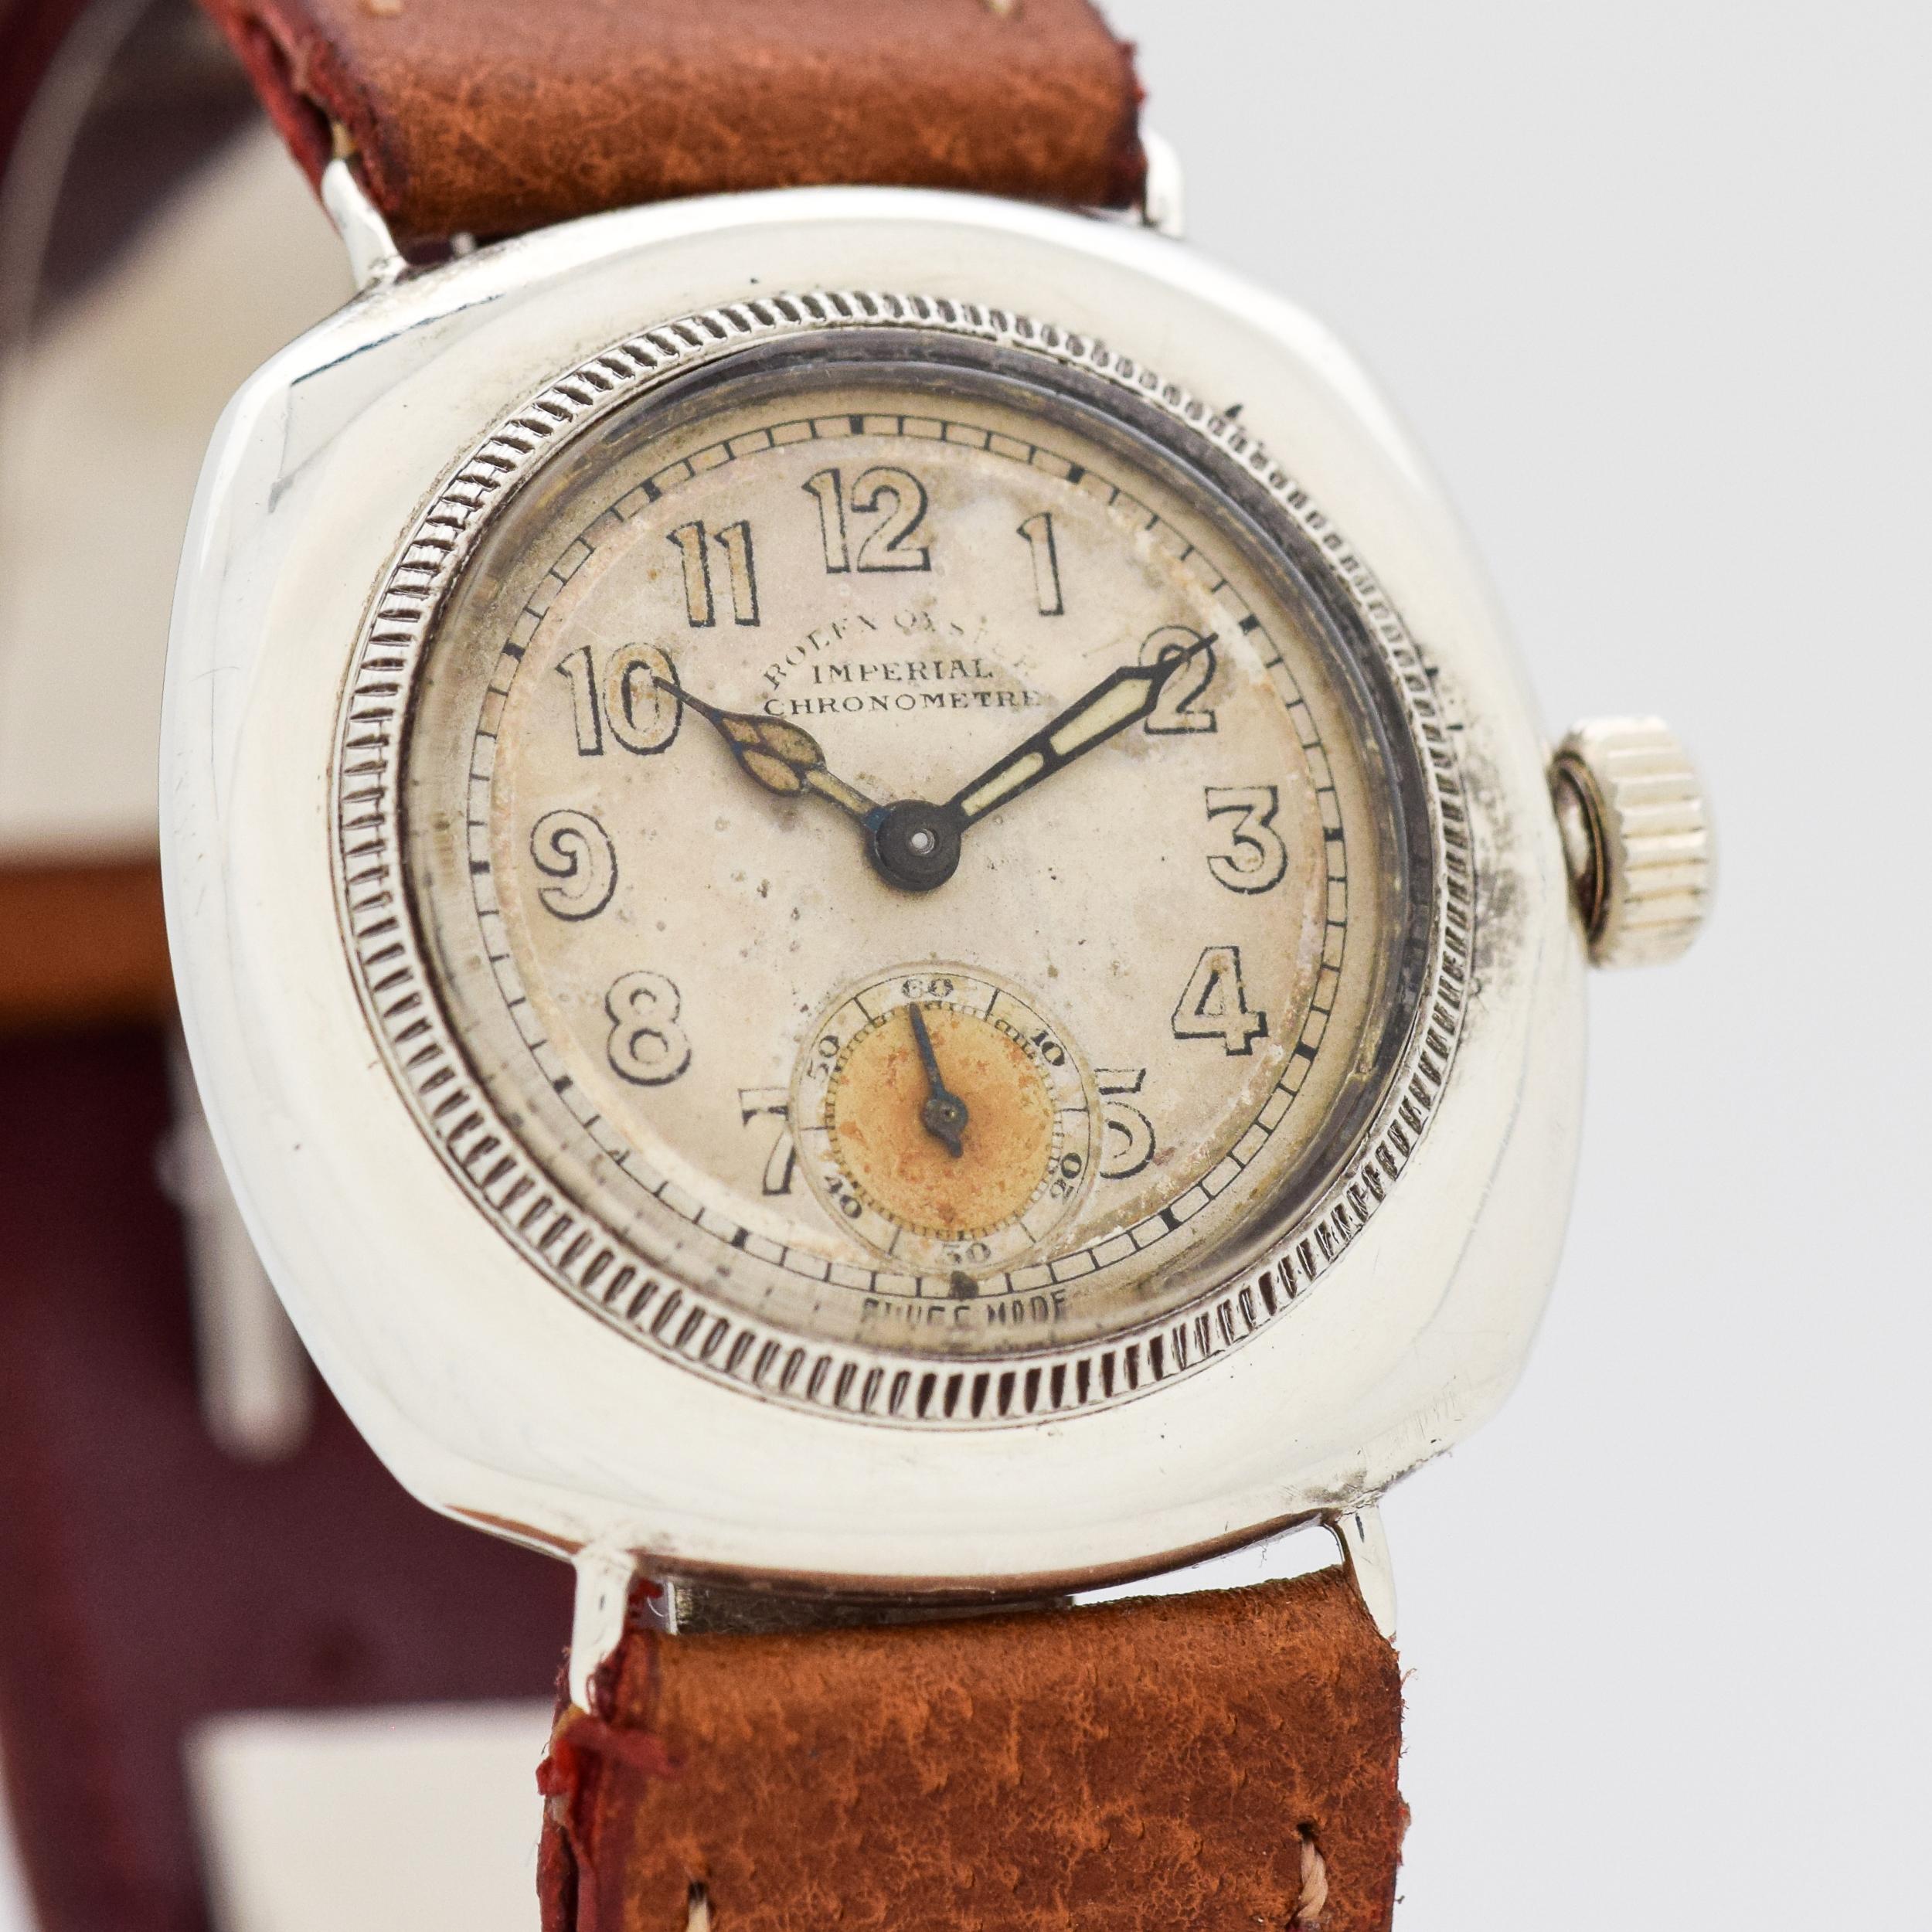 1925 Vintage Rolex Very Early Oyster Imperial Chronometre Cushion Shape Nickle watch with Original Silver Dial with Evaporated Luminous Arabic Numbers. 32mm x 38mm lug to lug (1.26 in. x 1.5 in.) - 15 jewel, manual caliber movement. Vintage-style